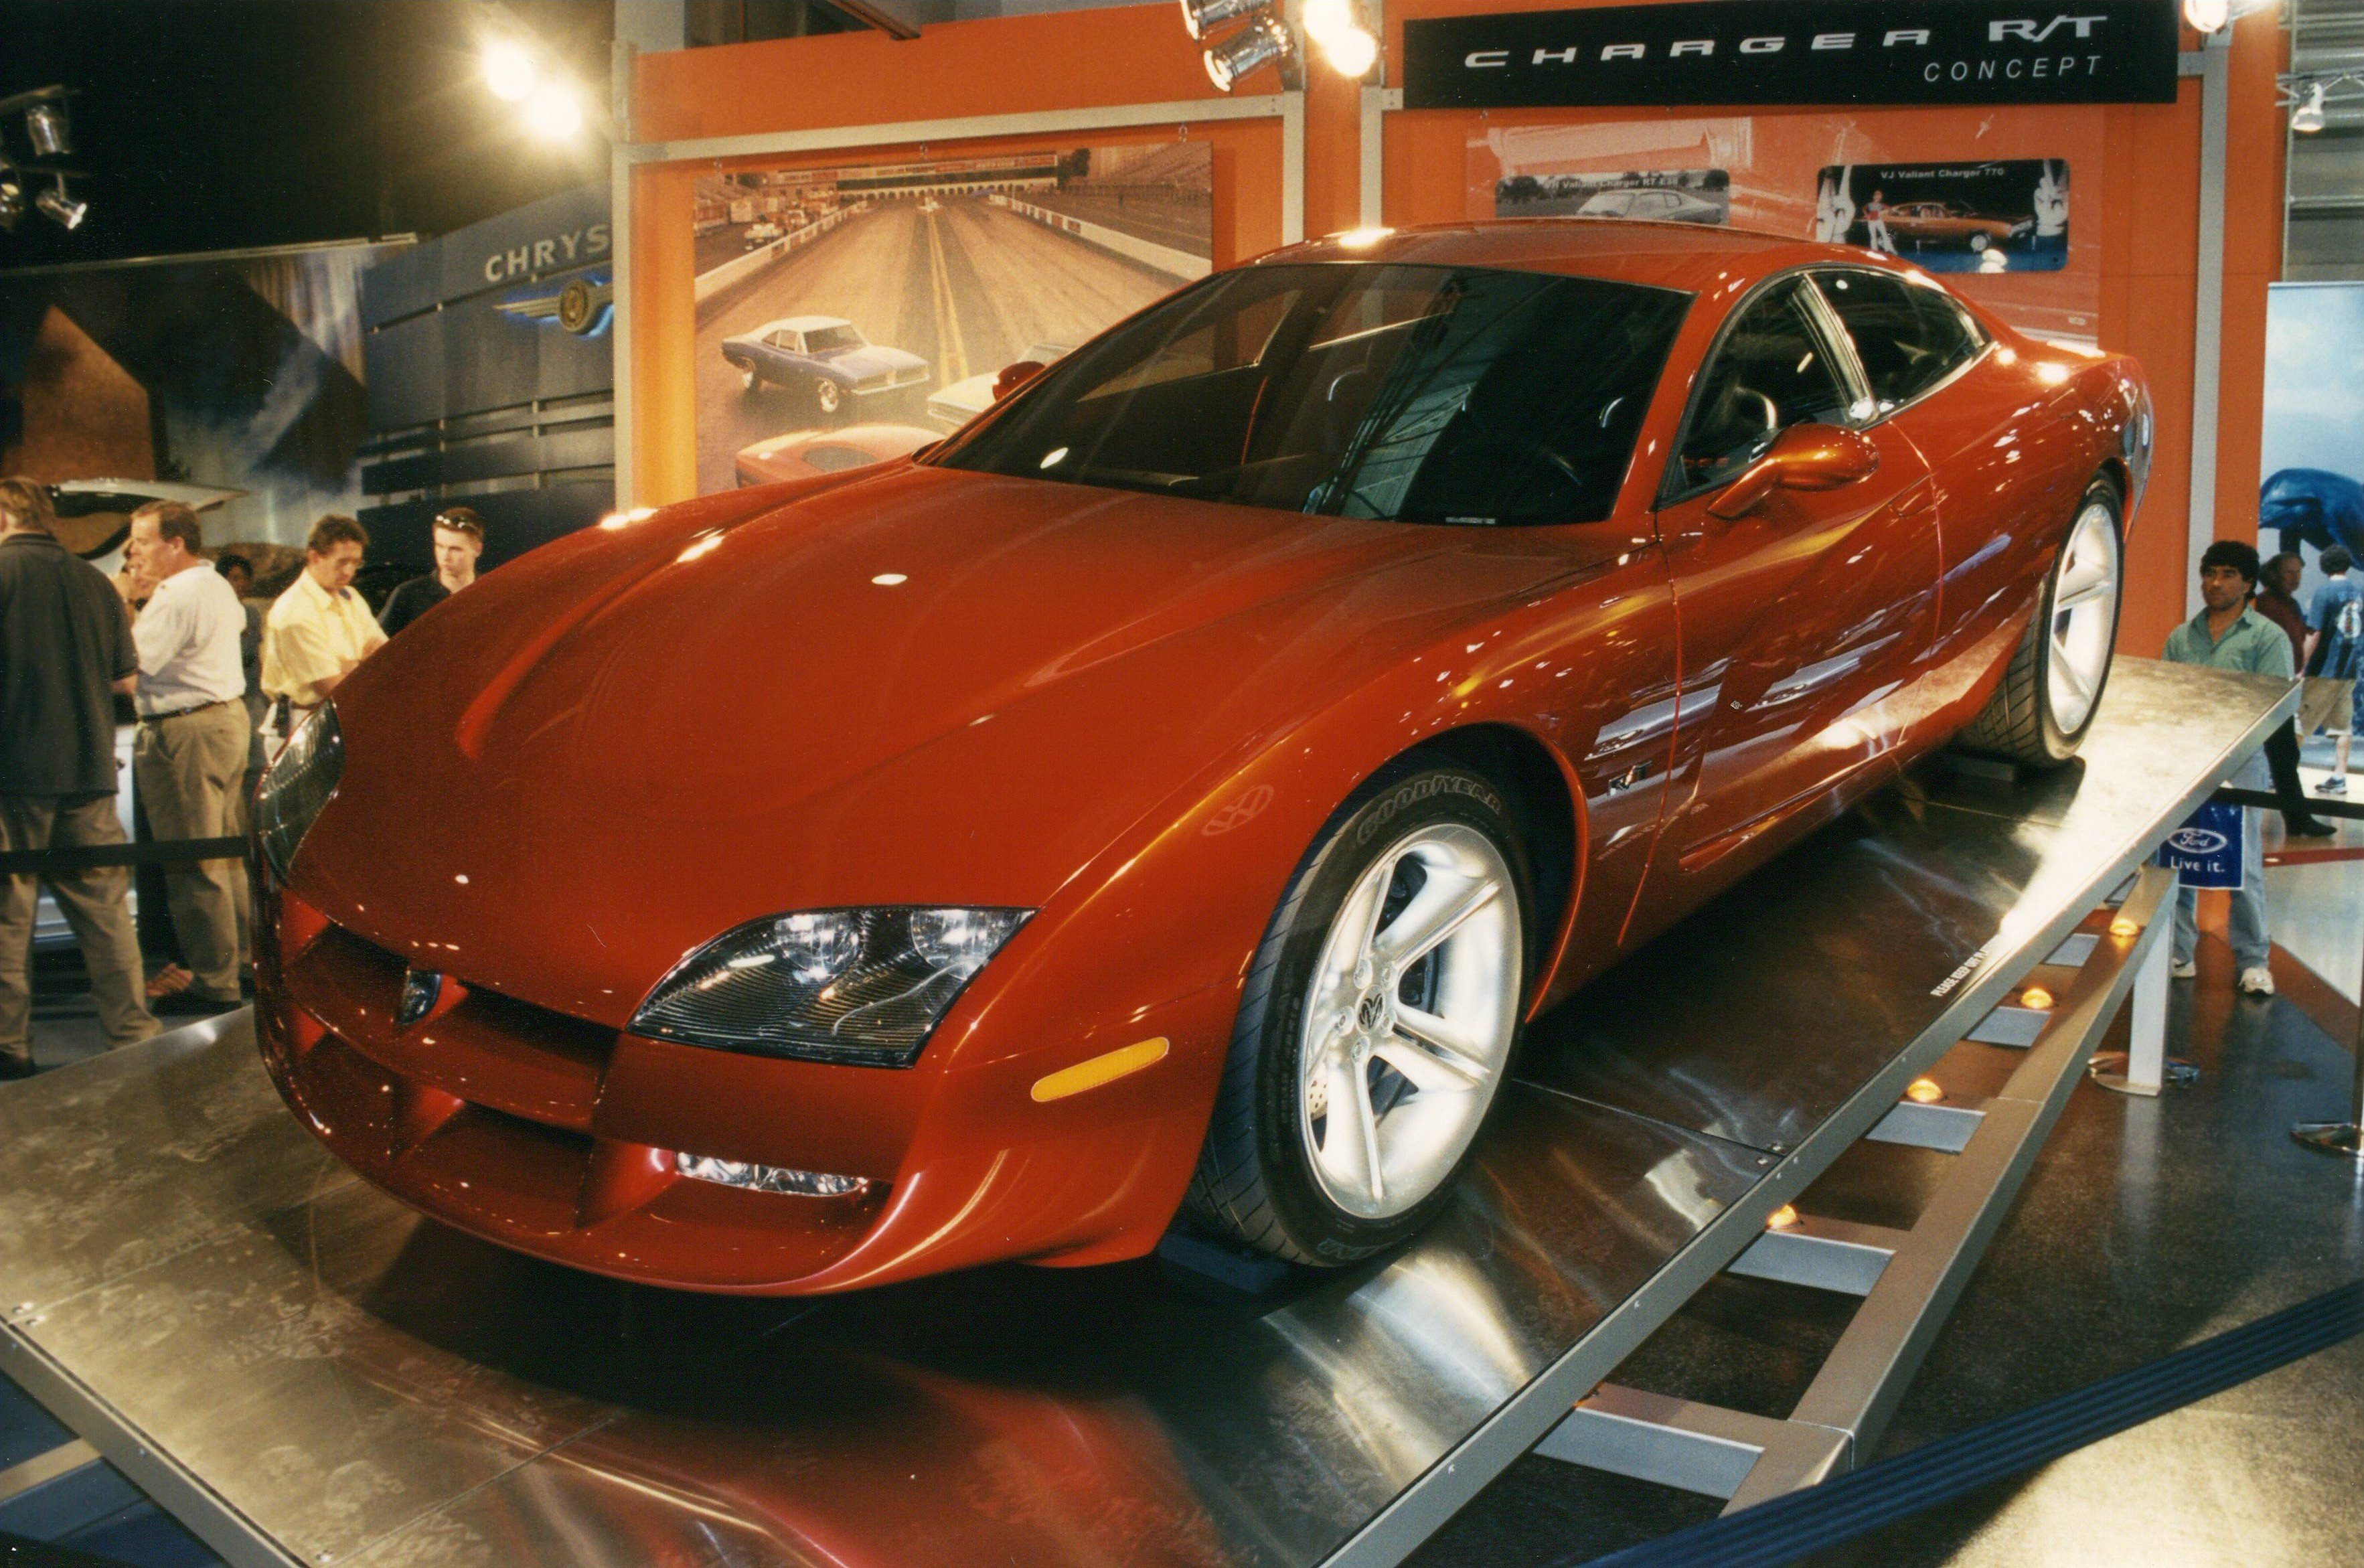 1999 Dodge Charger RT Concept.